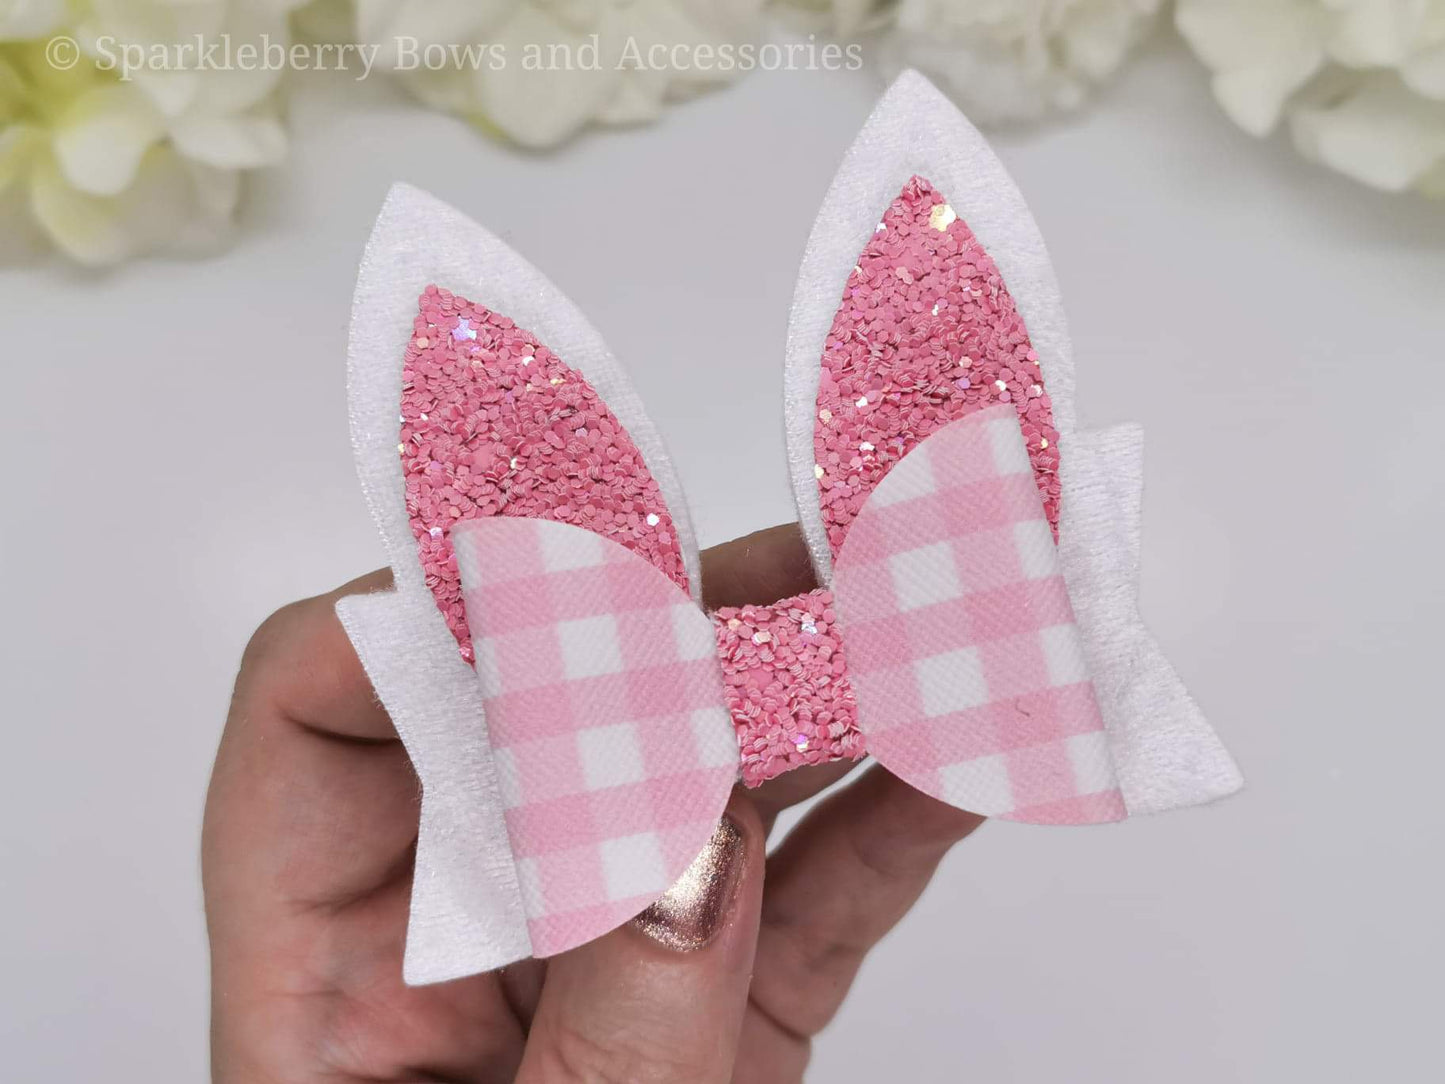 New bunny ear and bow digital download 3”